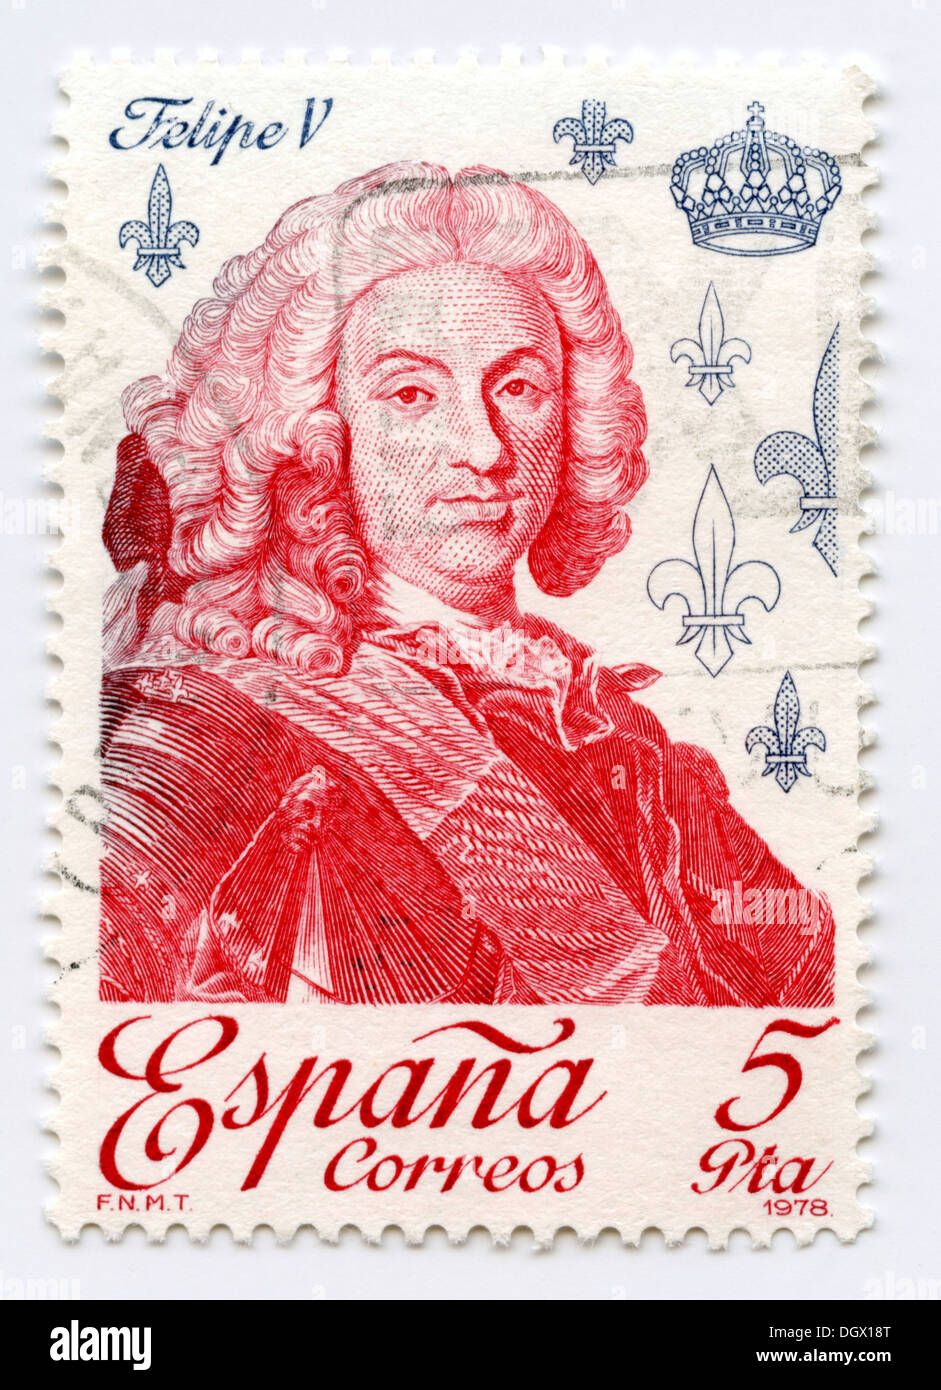 Spain postage stamp depicting Philip V de Borbón, King of Spain from1700 to 1724 Stock Photo